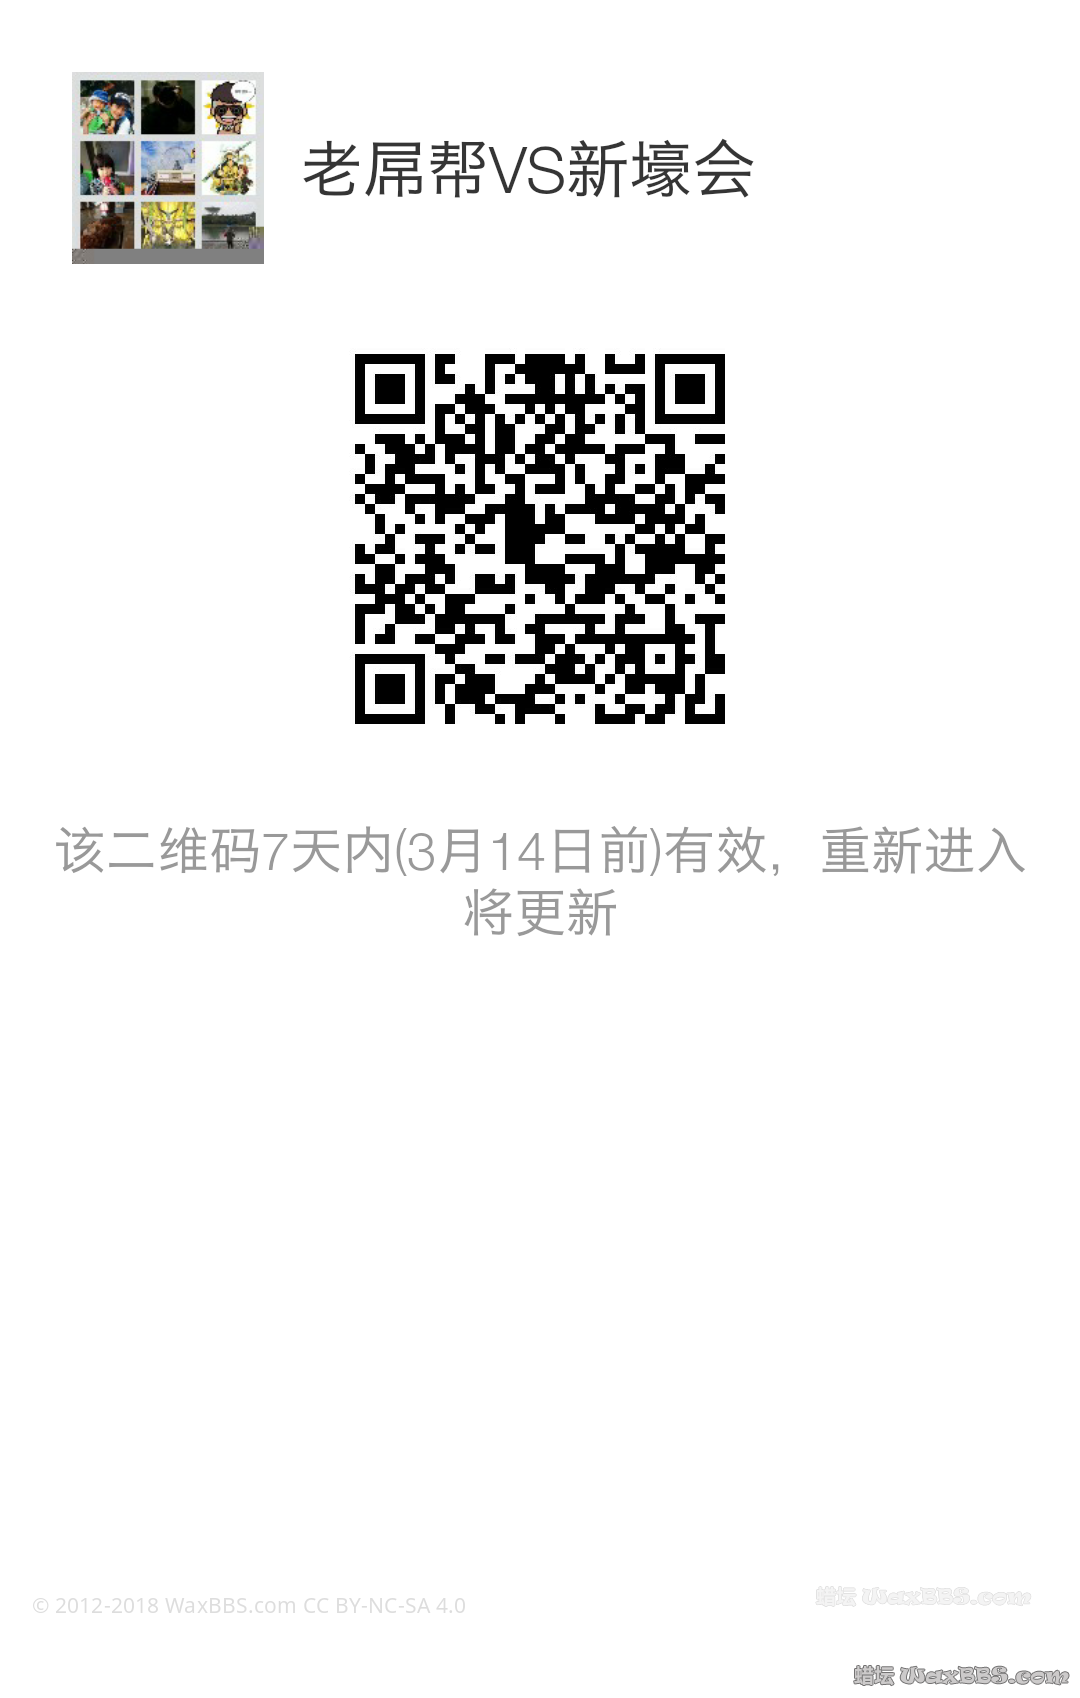 mmqrcode1488863670430.png